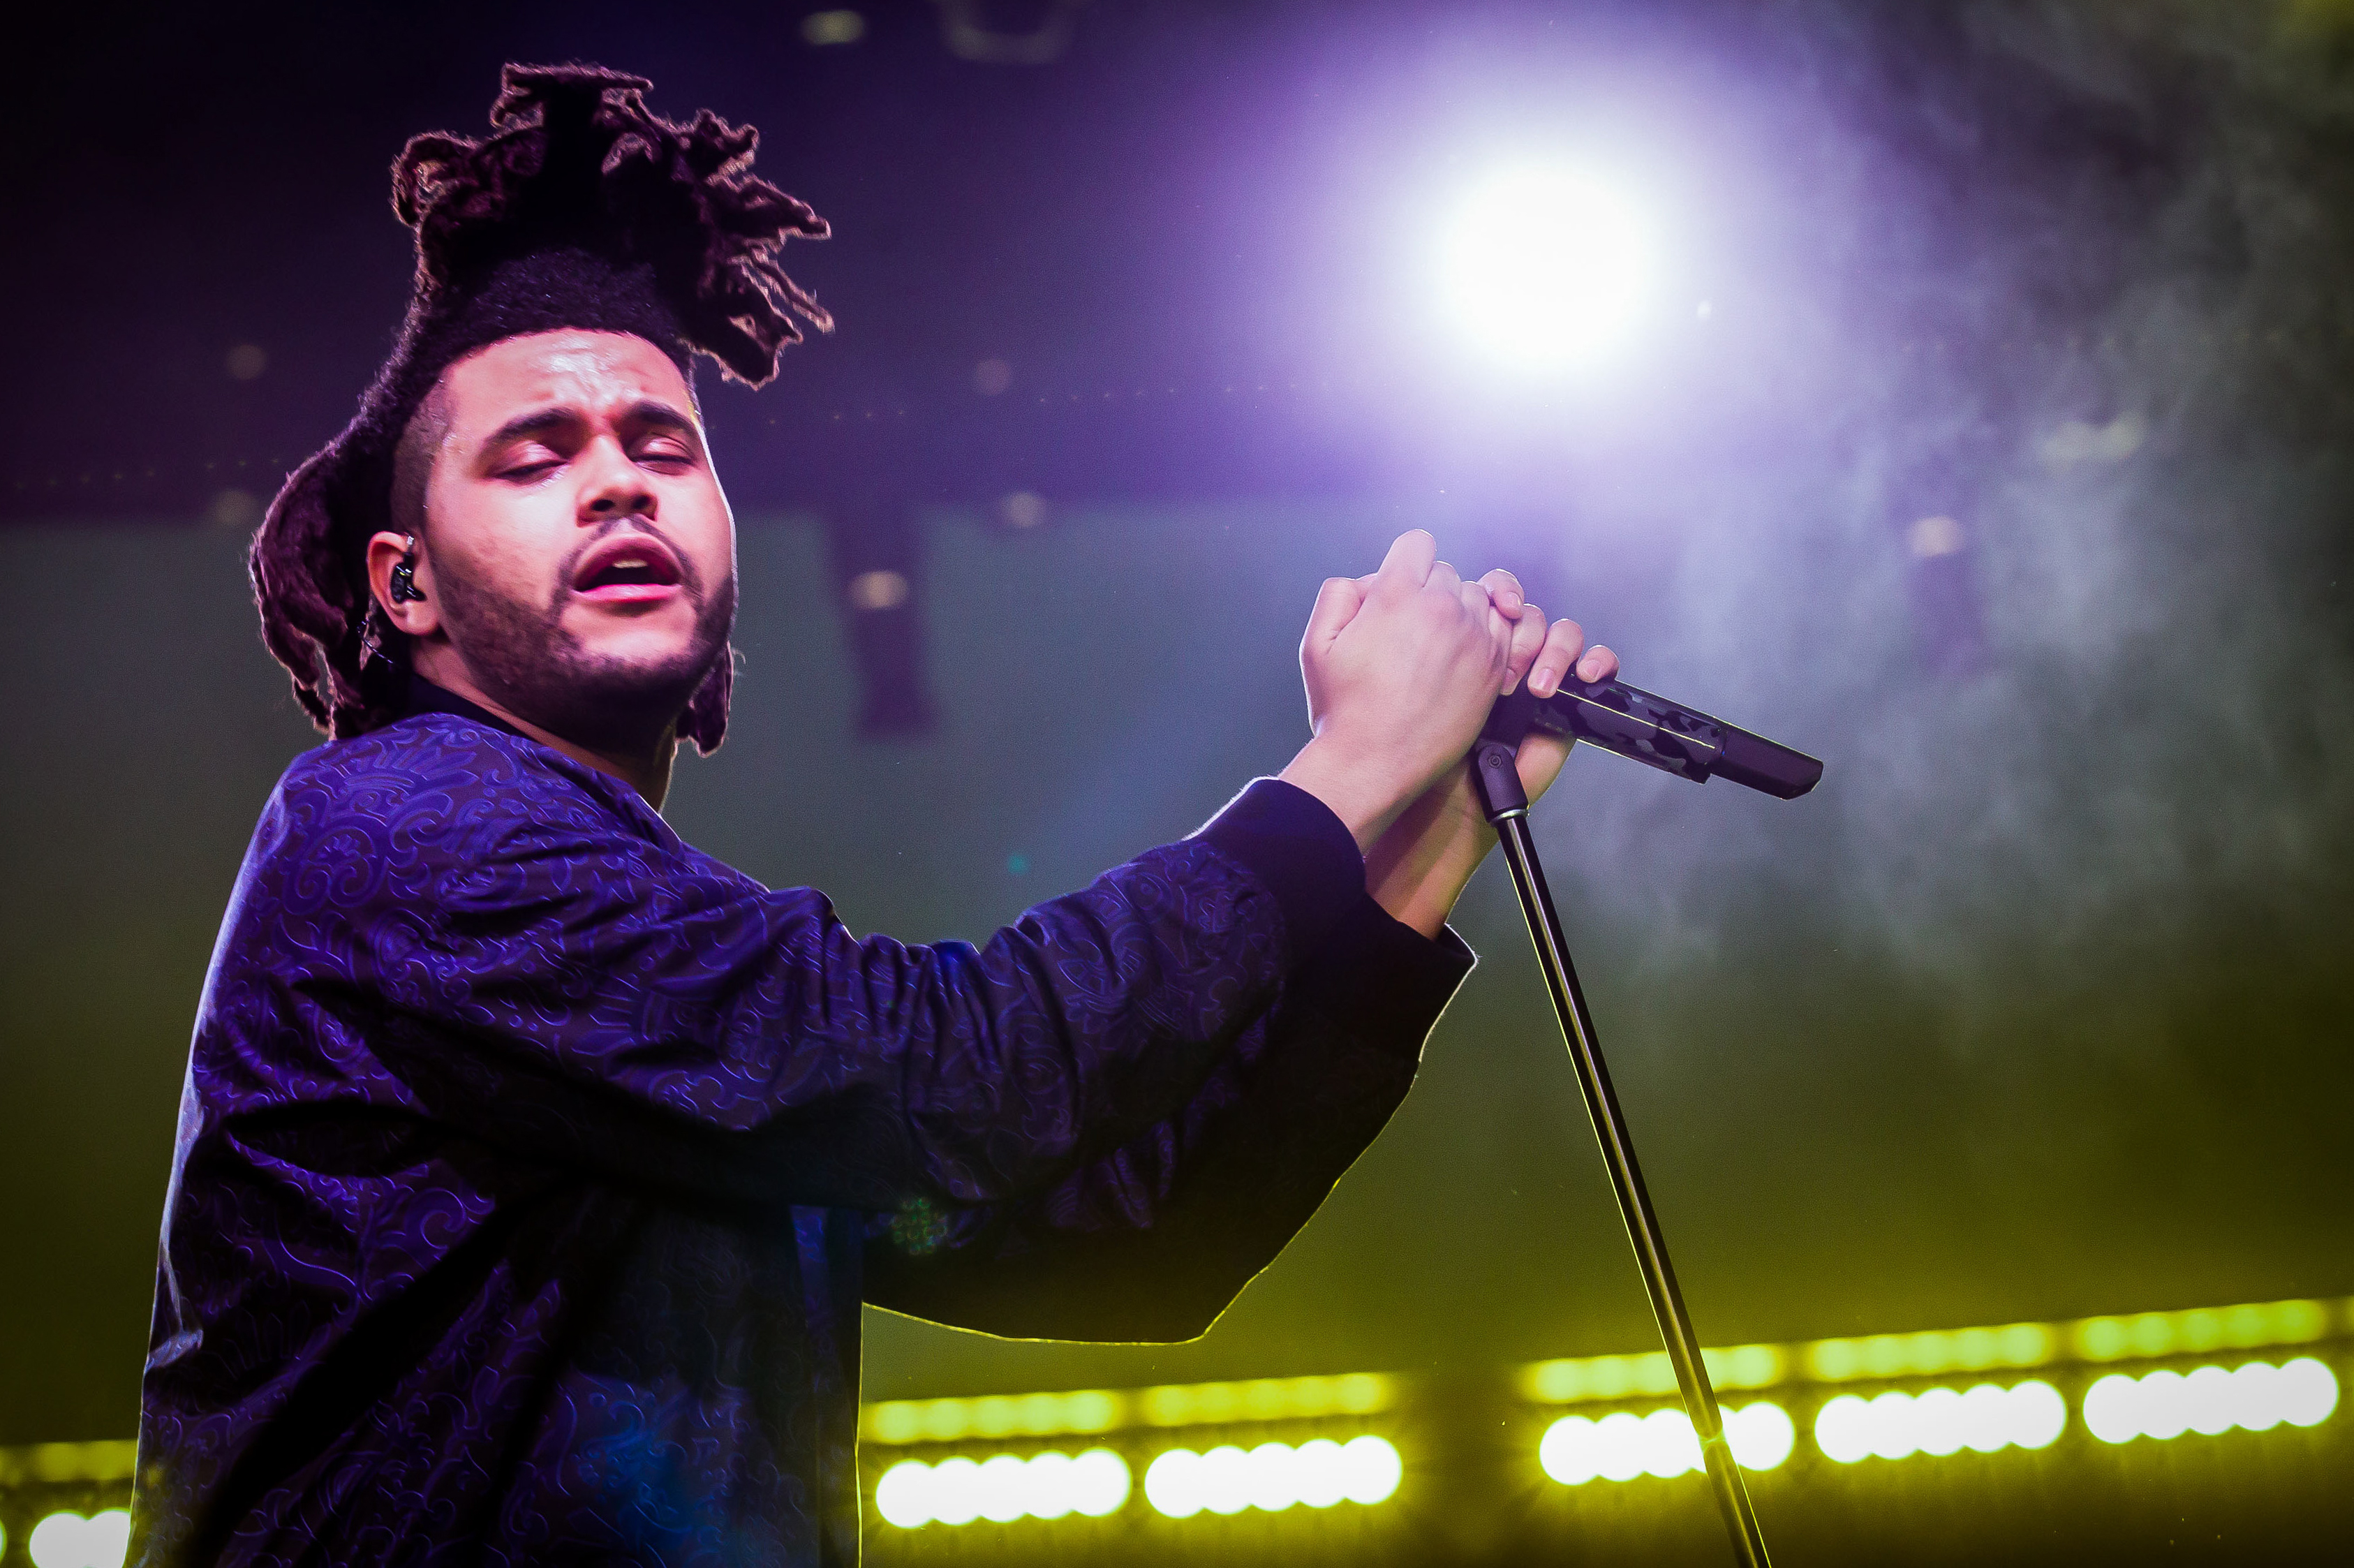 Weekend concerts. The Weeknd. The Weeknd 2015. Концерт the Weeknd. The Weeknd фото.